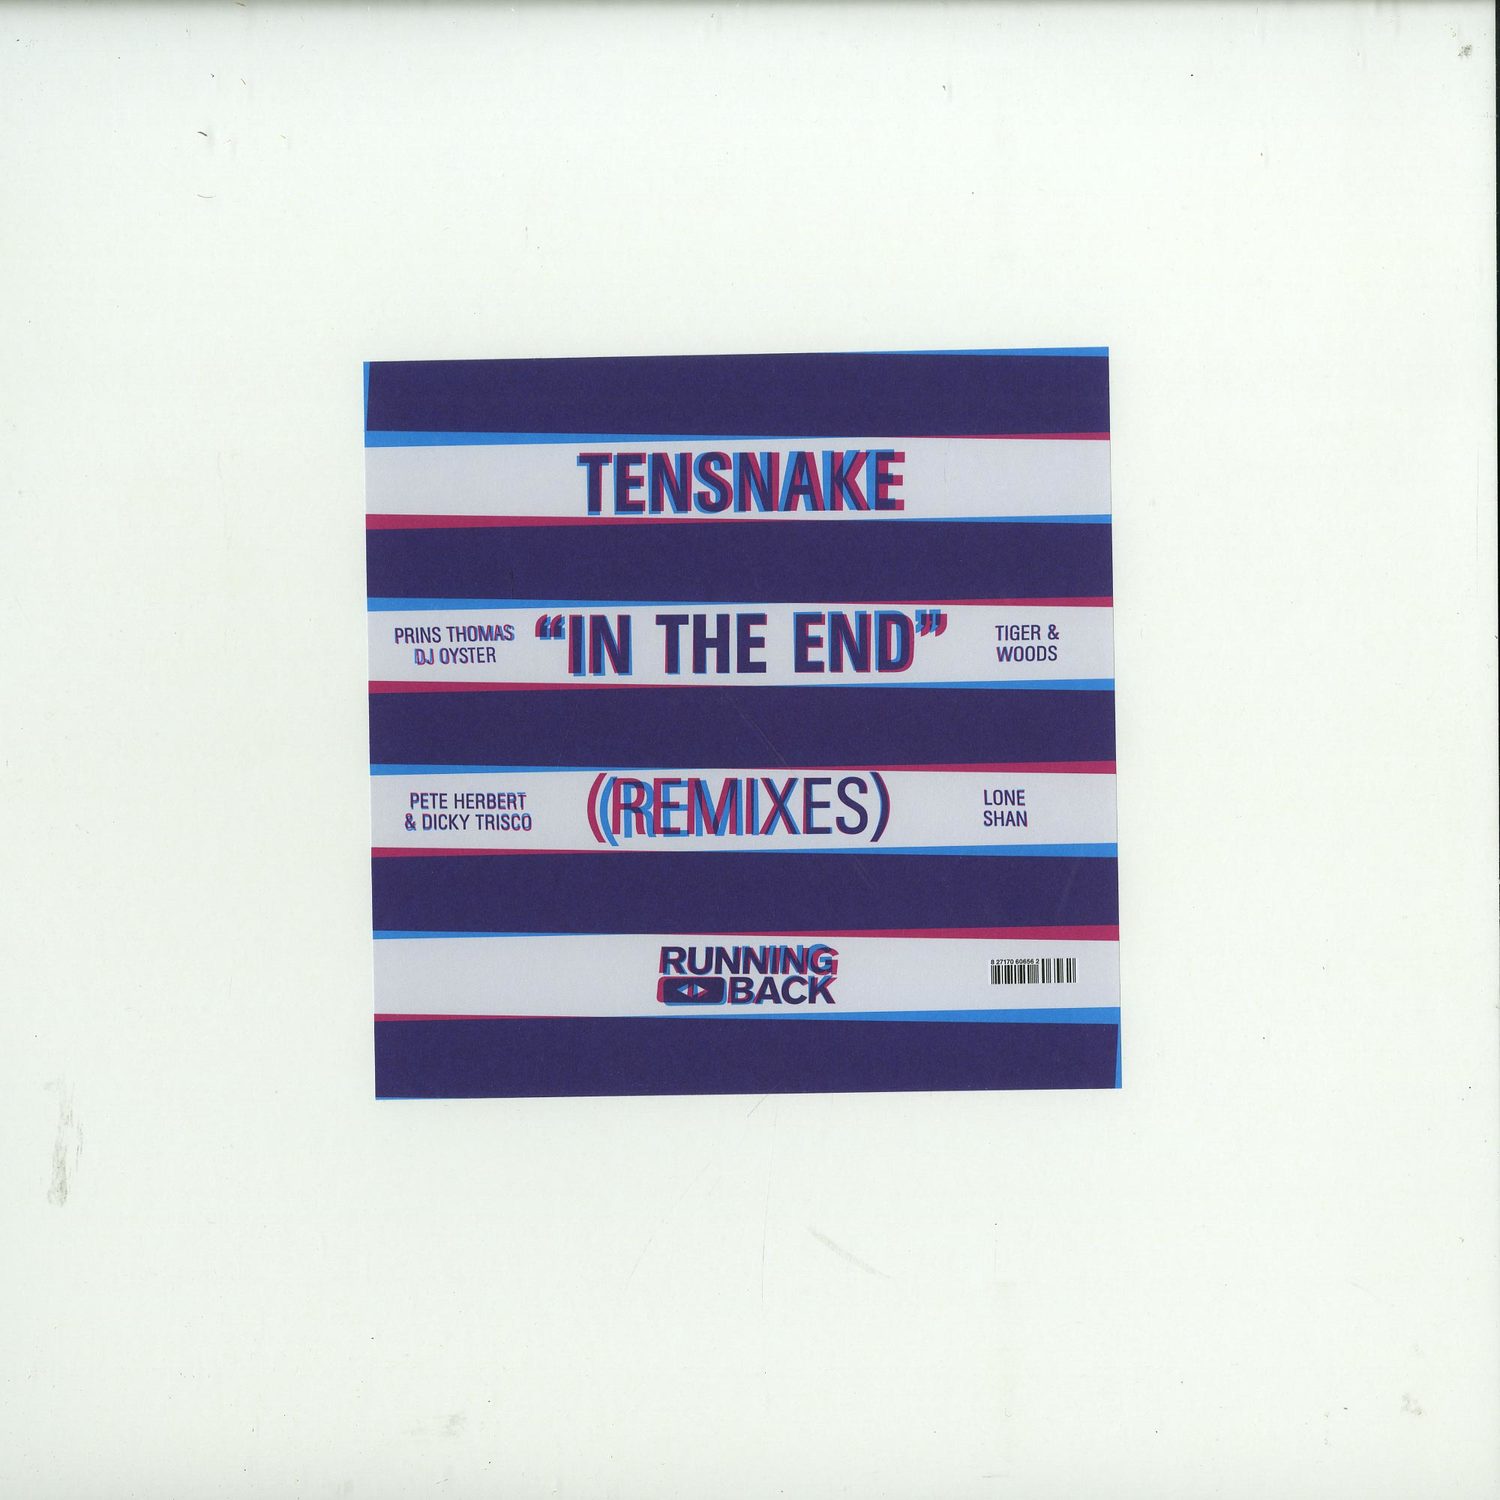 Tensnake - IN THE END - REMIXES 